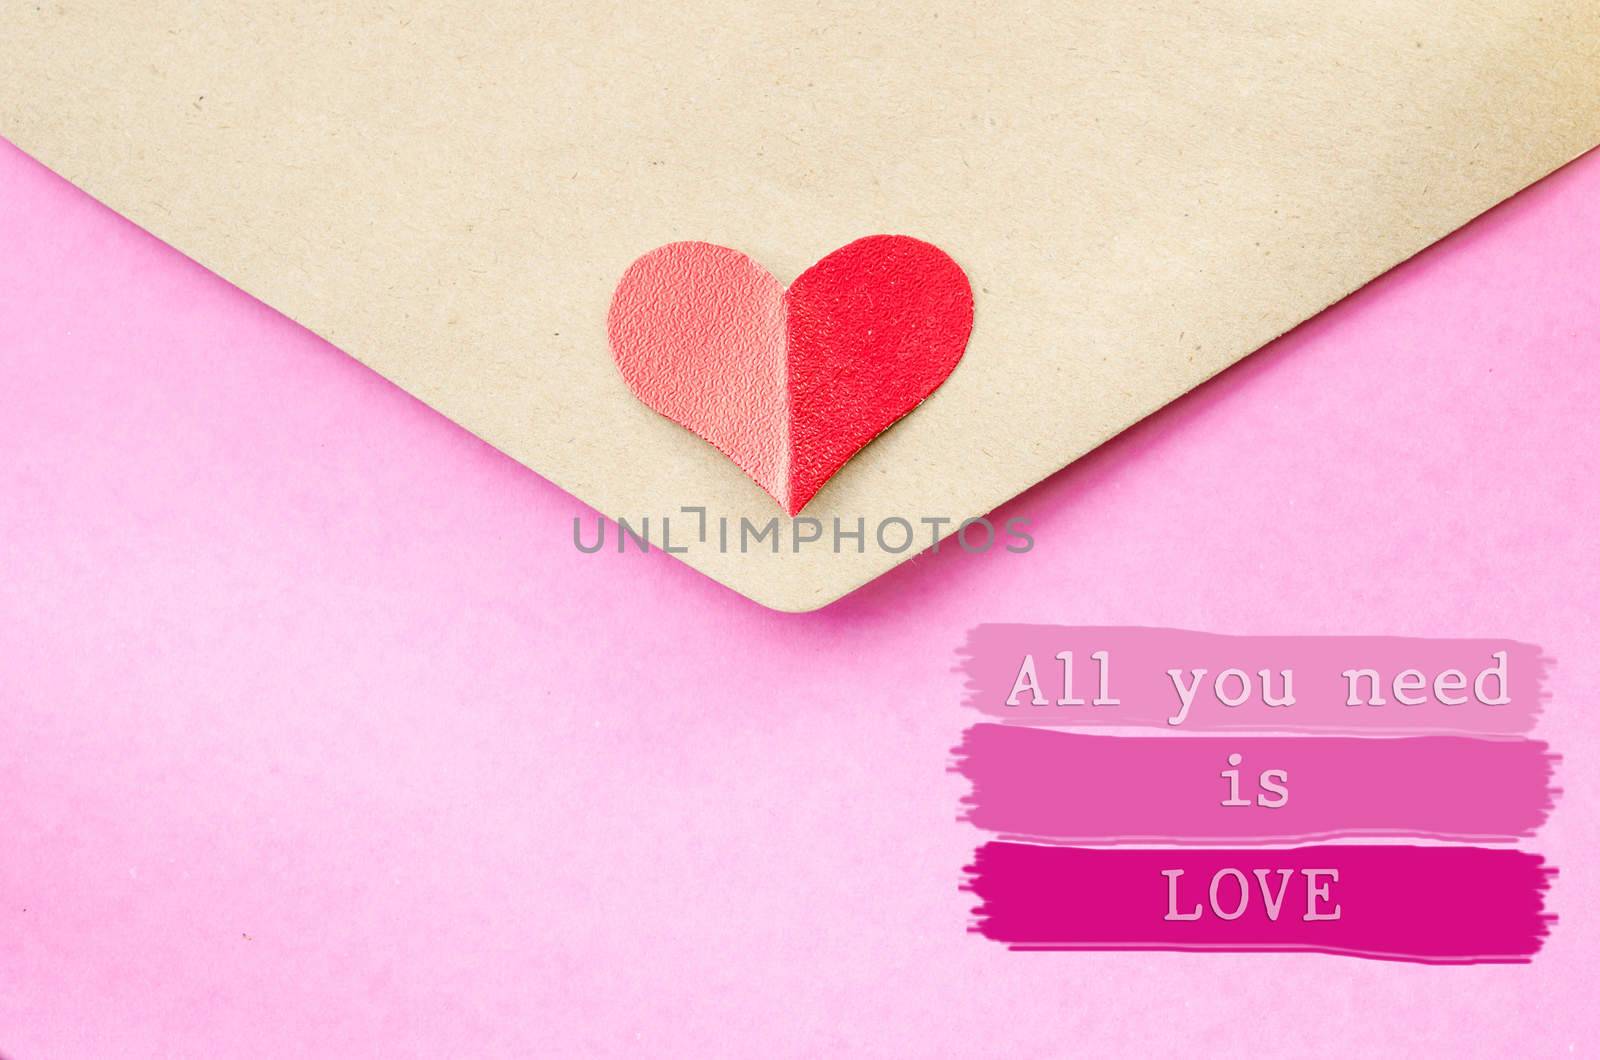 All you need is love. Love letter and wording with text love